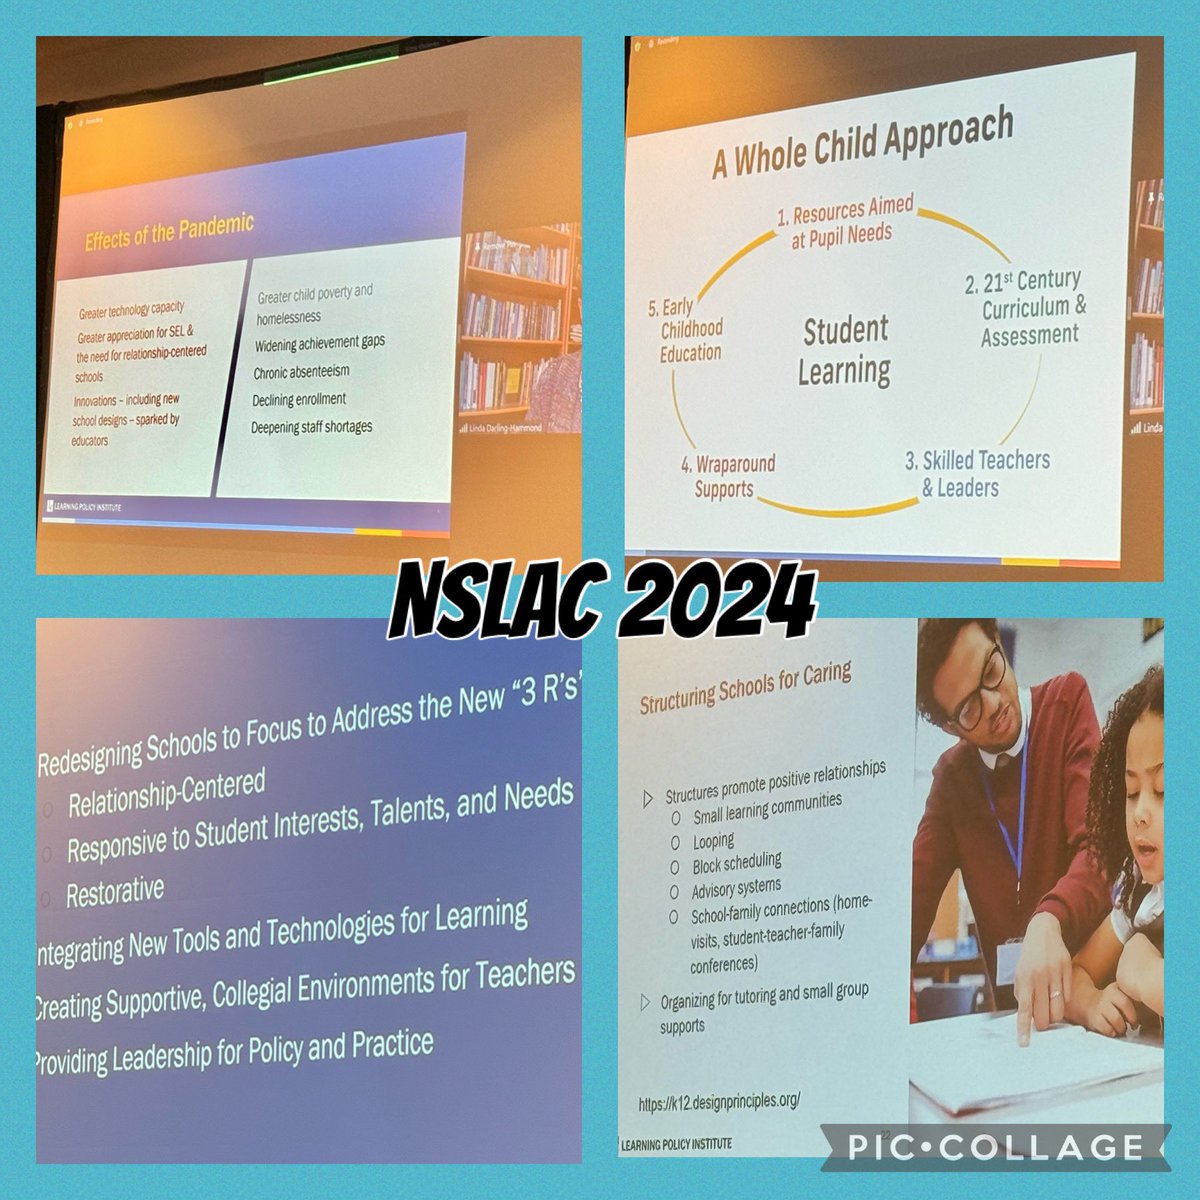 State of the Union in K-12 education from Linda Darling-Hammond, the President and CEO of the Learning Policy Institute #NSLAC2024 #PrincipalsAdvocate